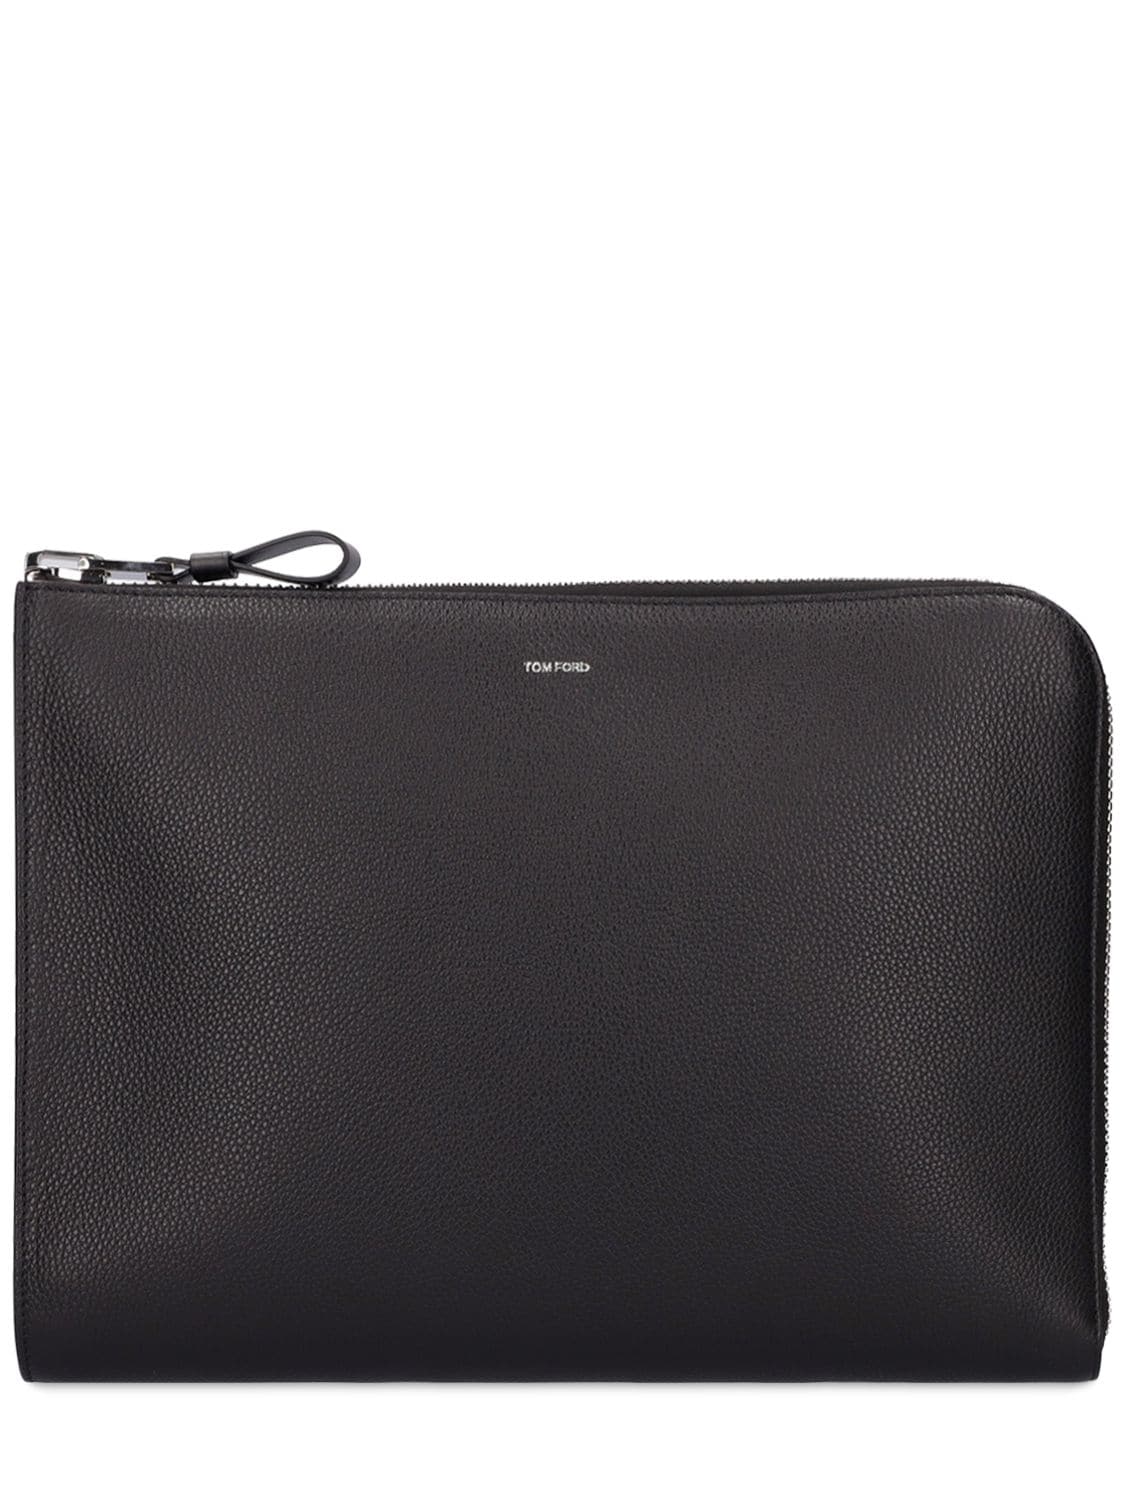 Tom Ford, Bags, Tom Ford Black Leather Zip Clutch